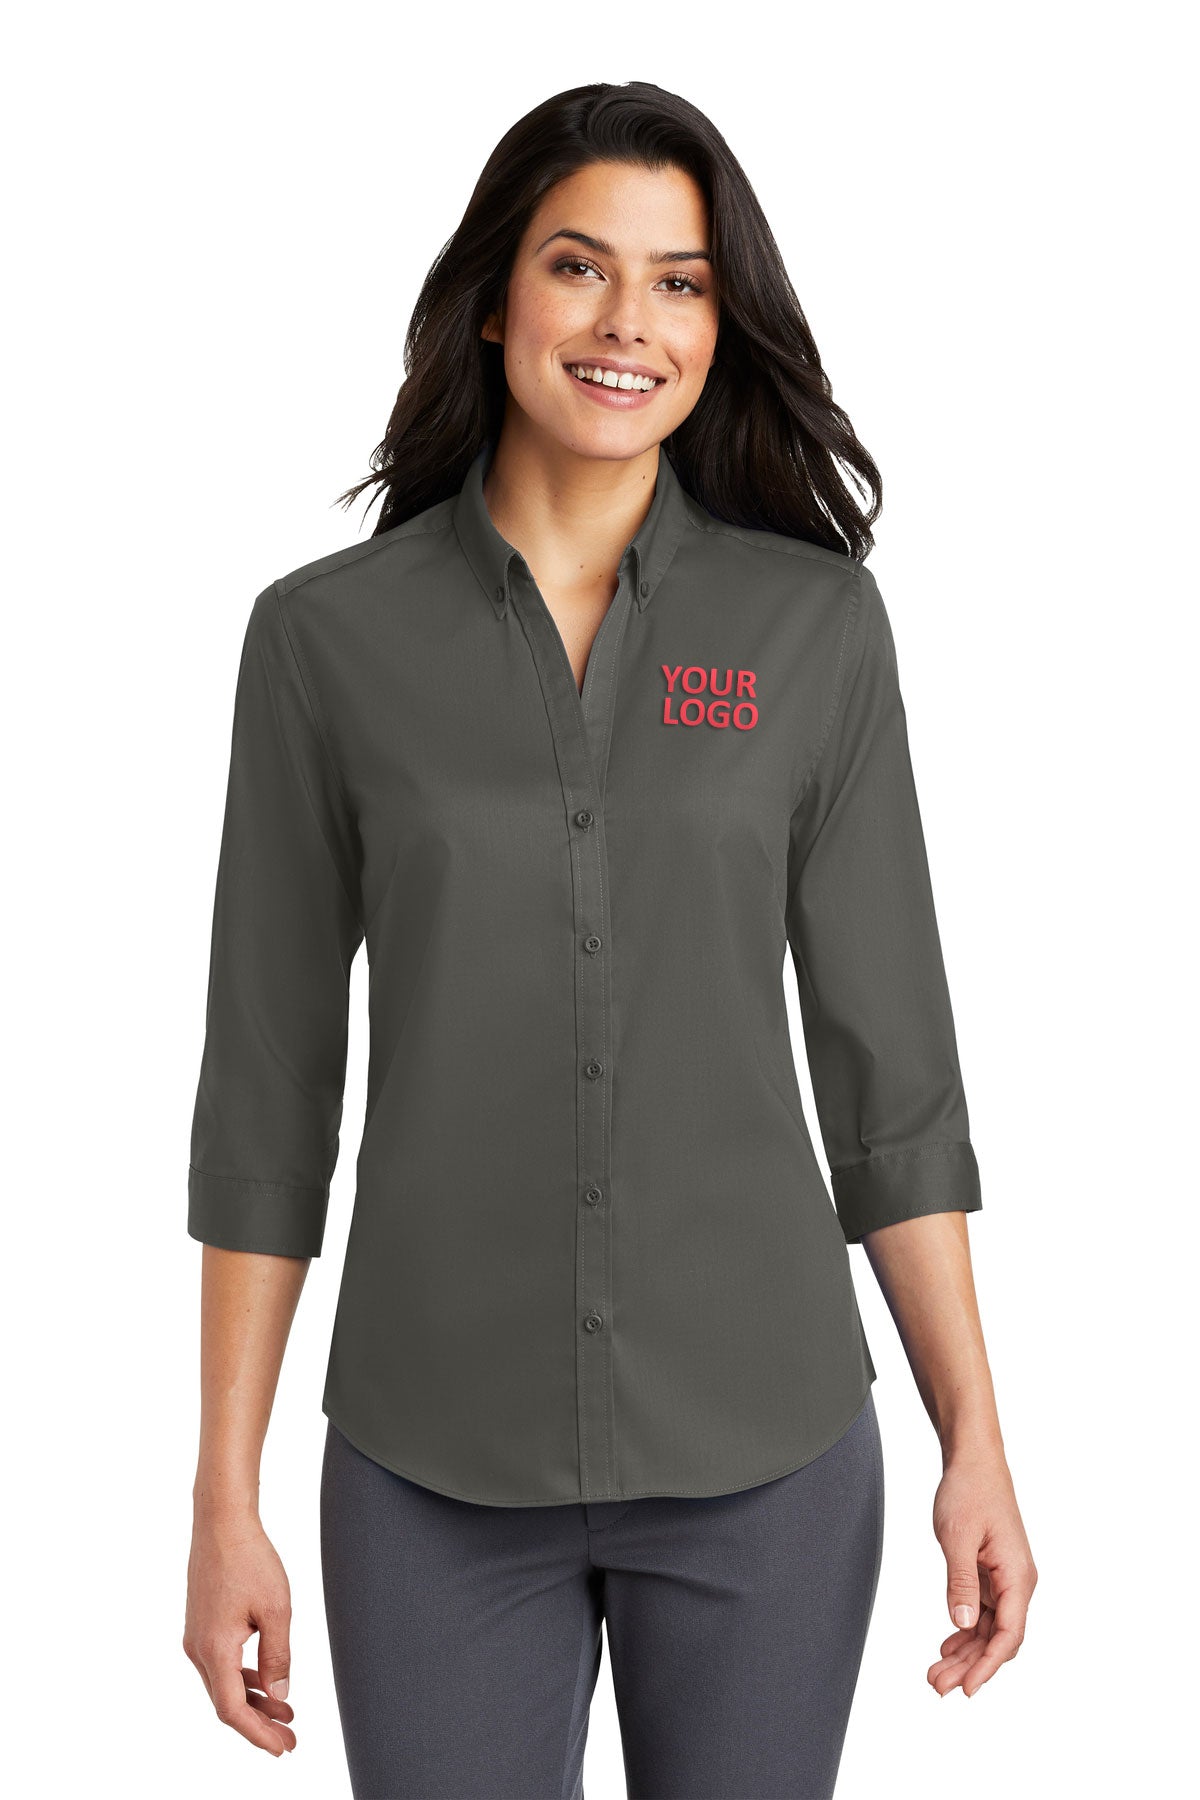 Port Authority Sterling Grey L665 work shirts with logo